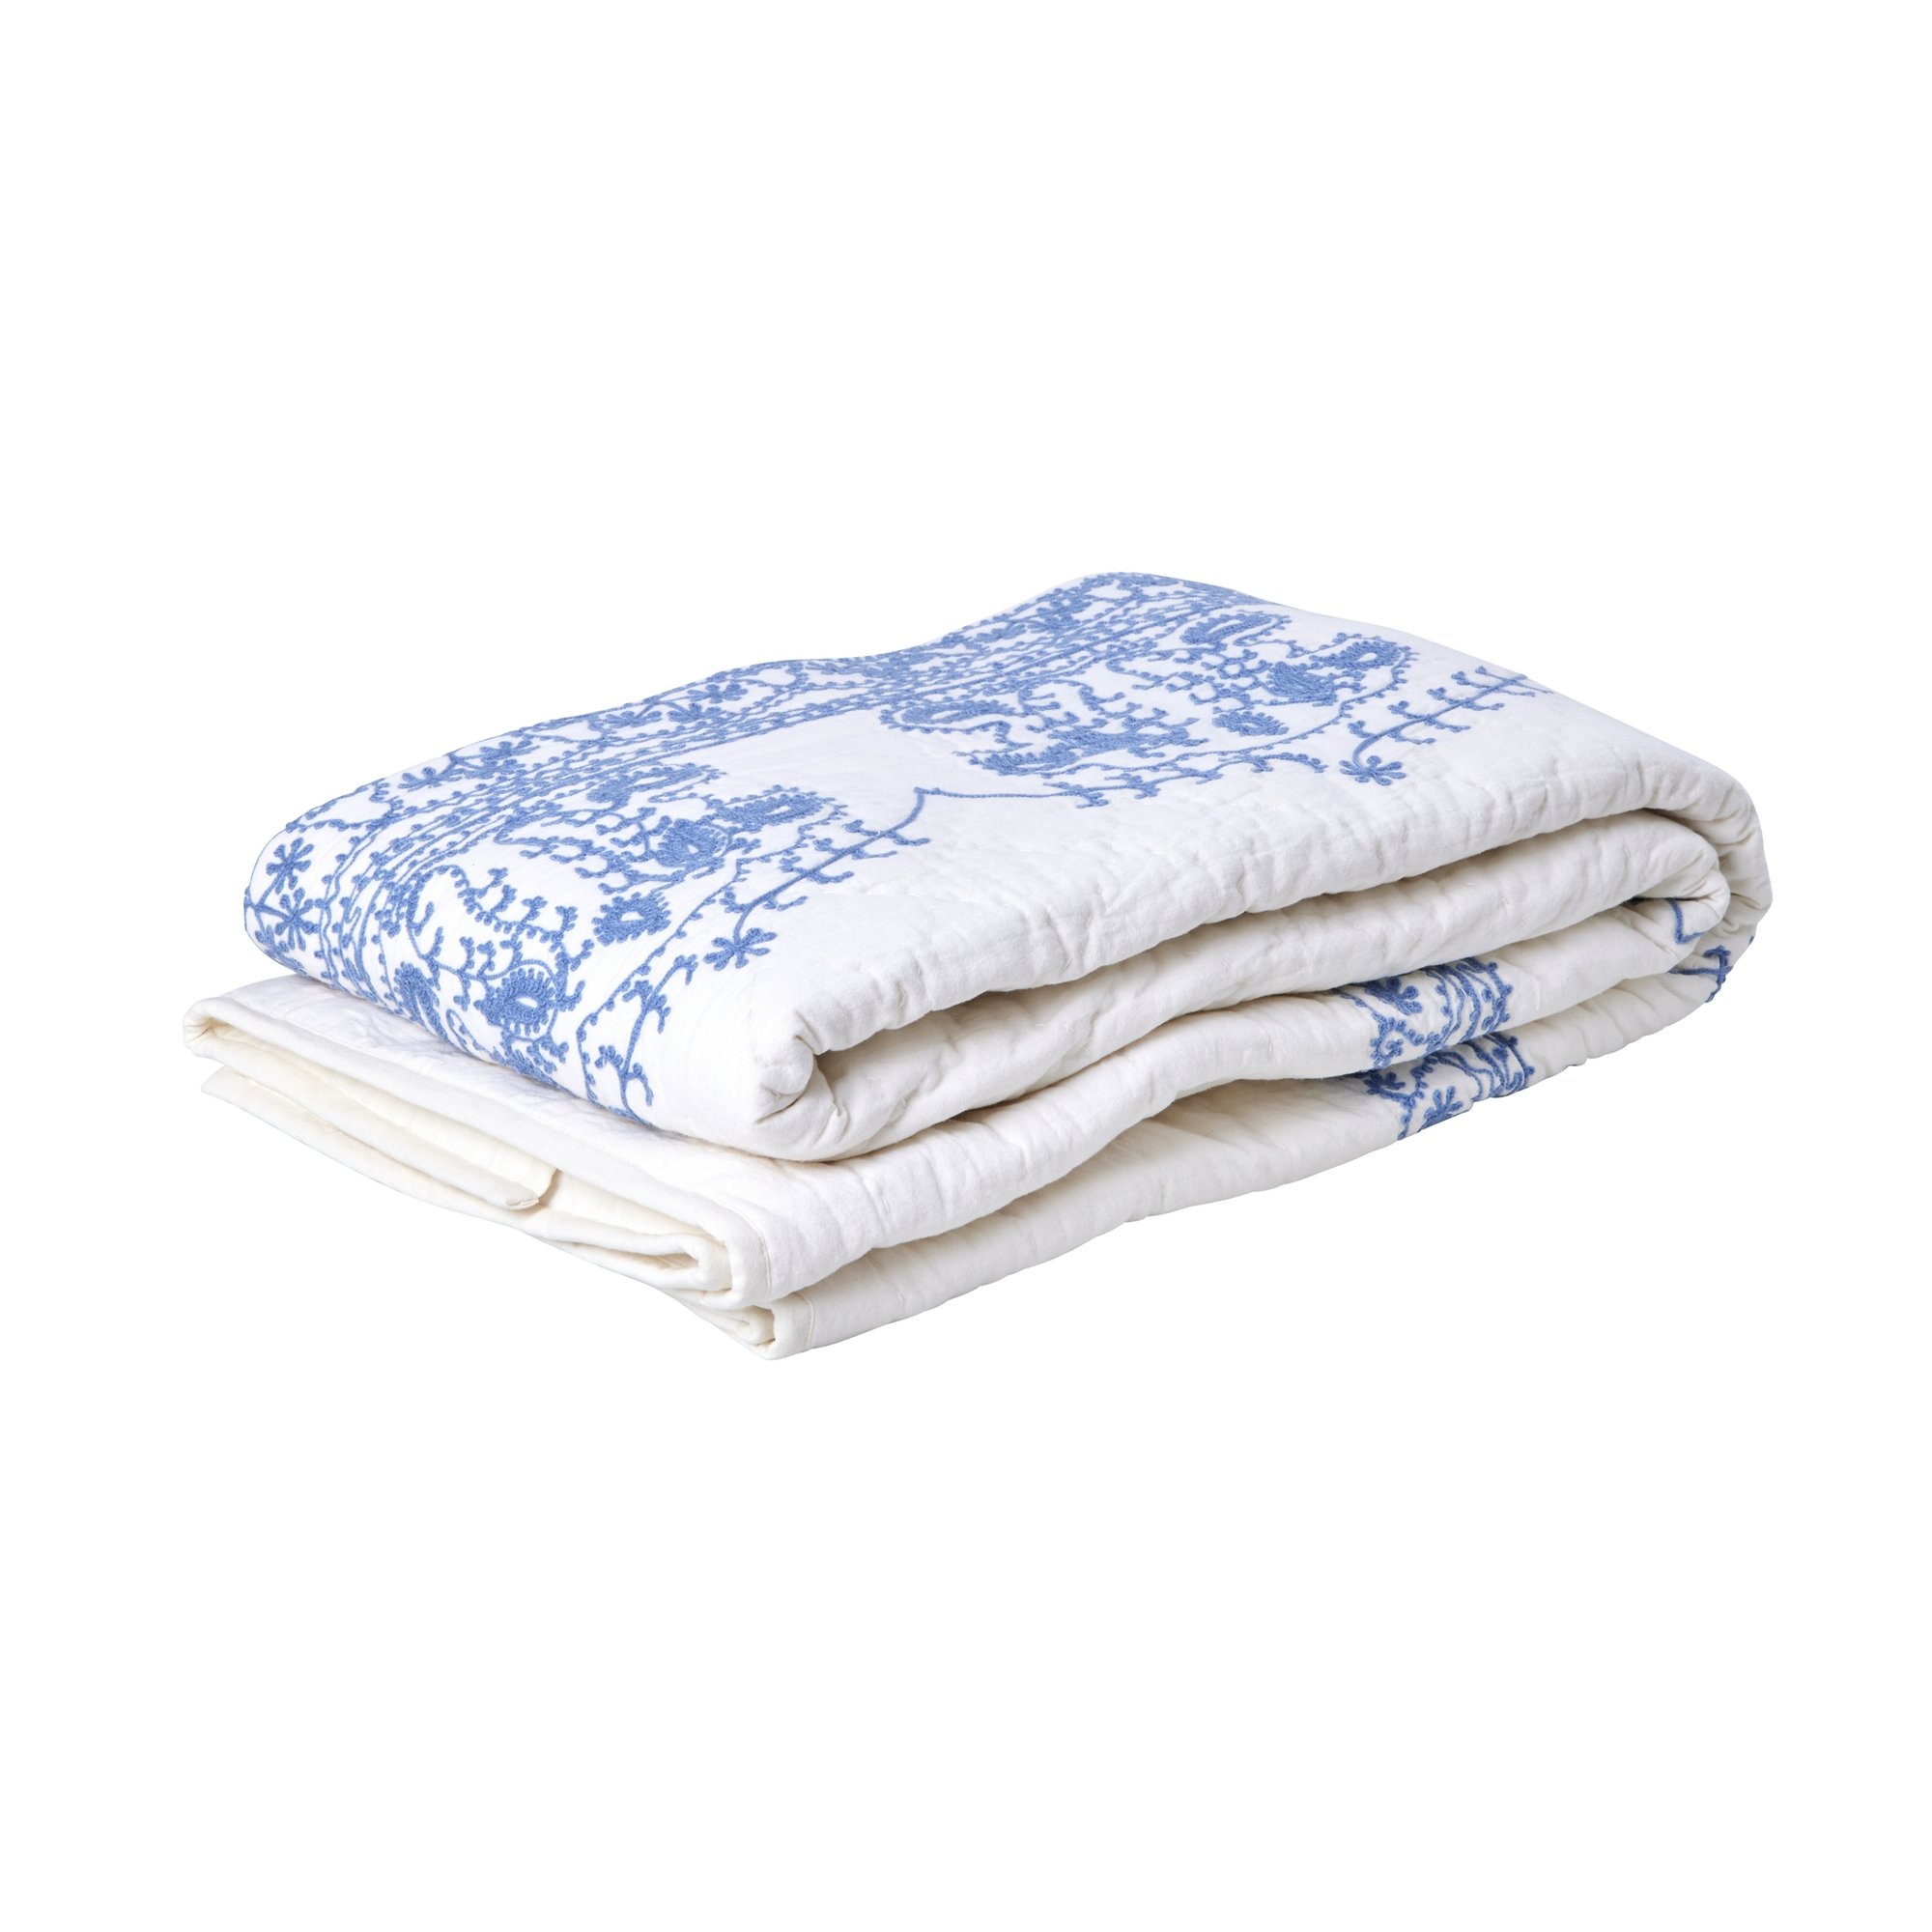 Rice - Cotton Quilt Blanket in White with Blue Embroidery